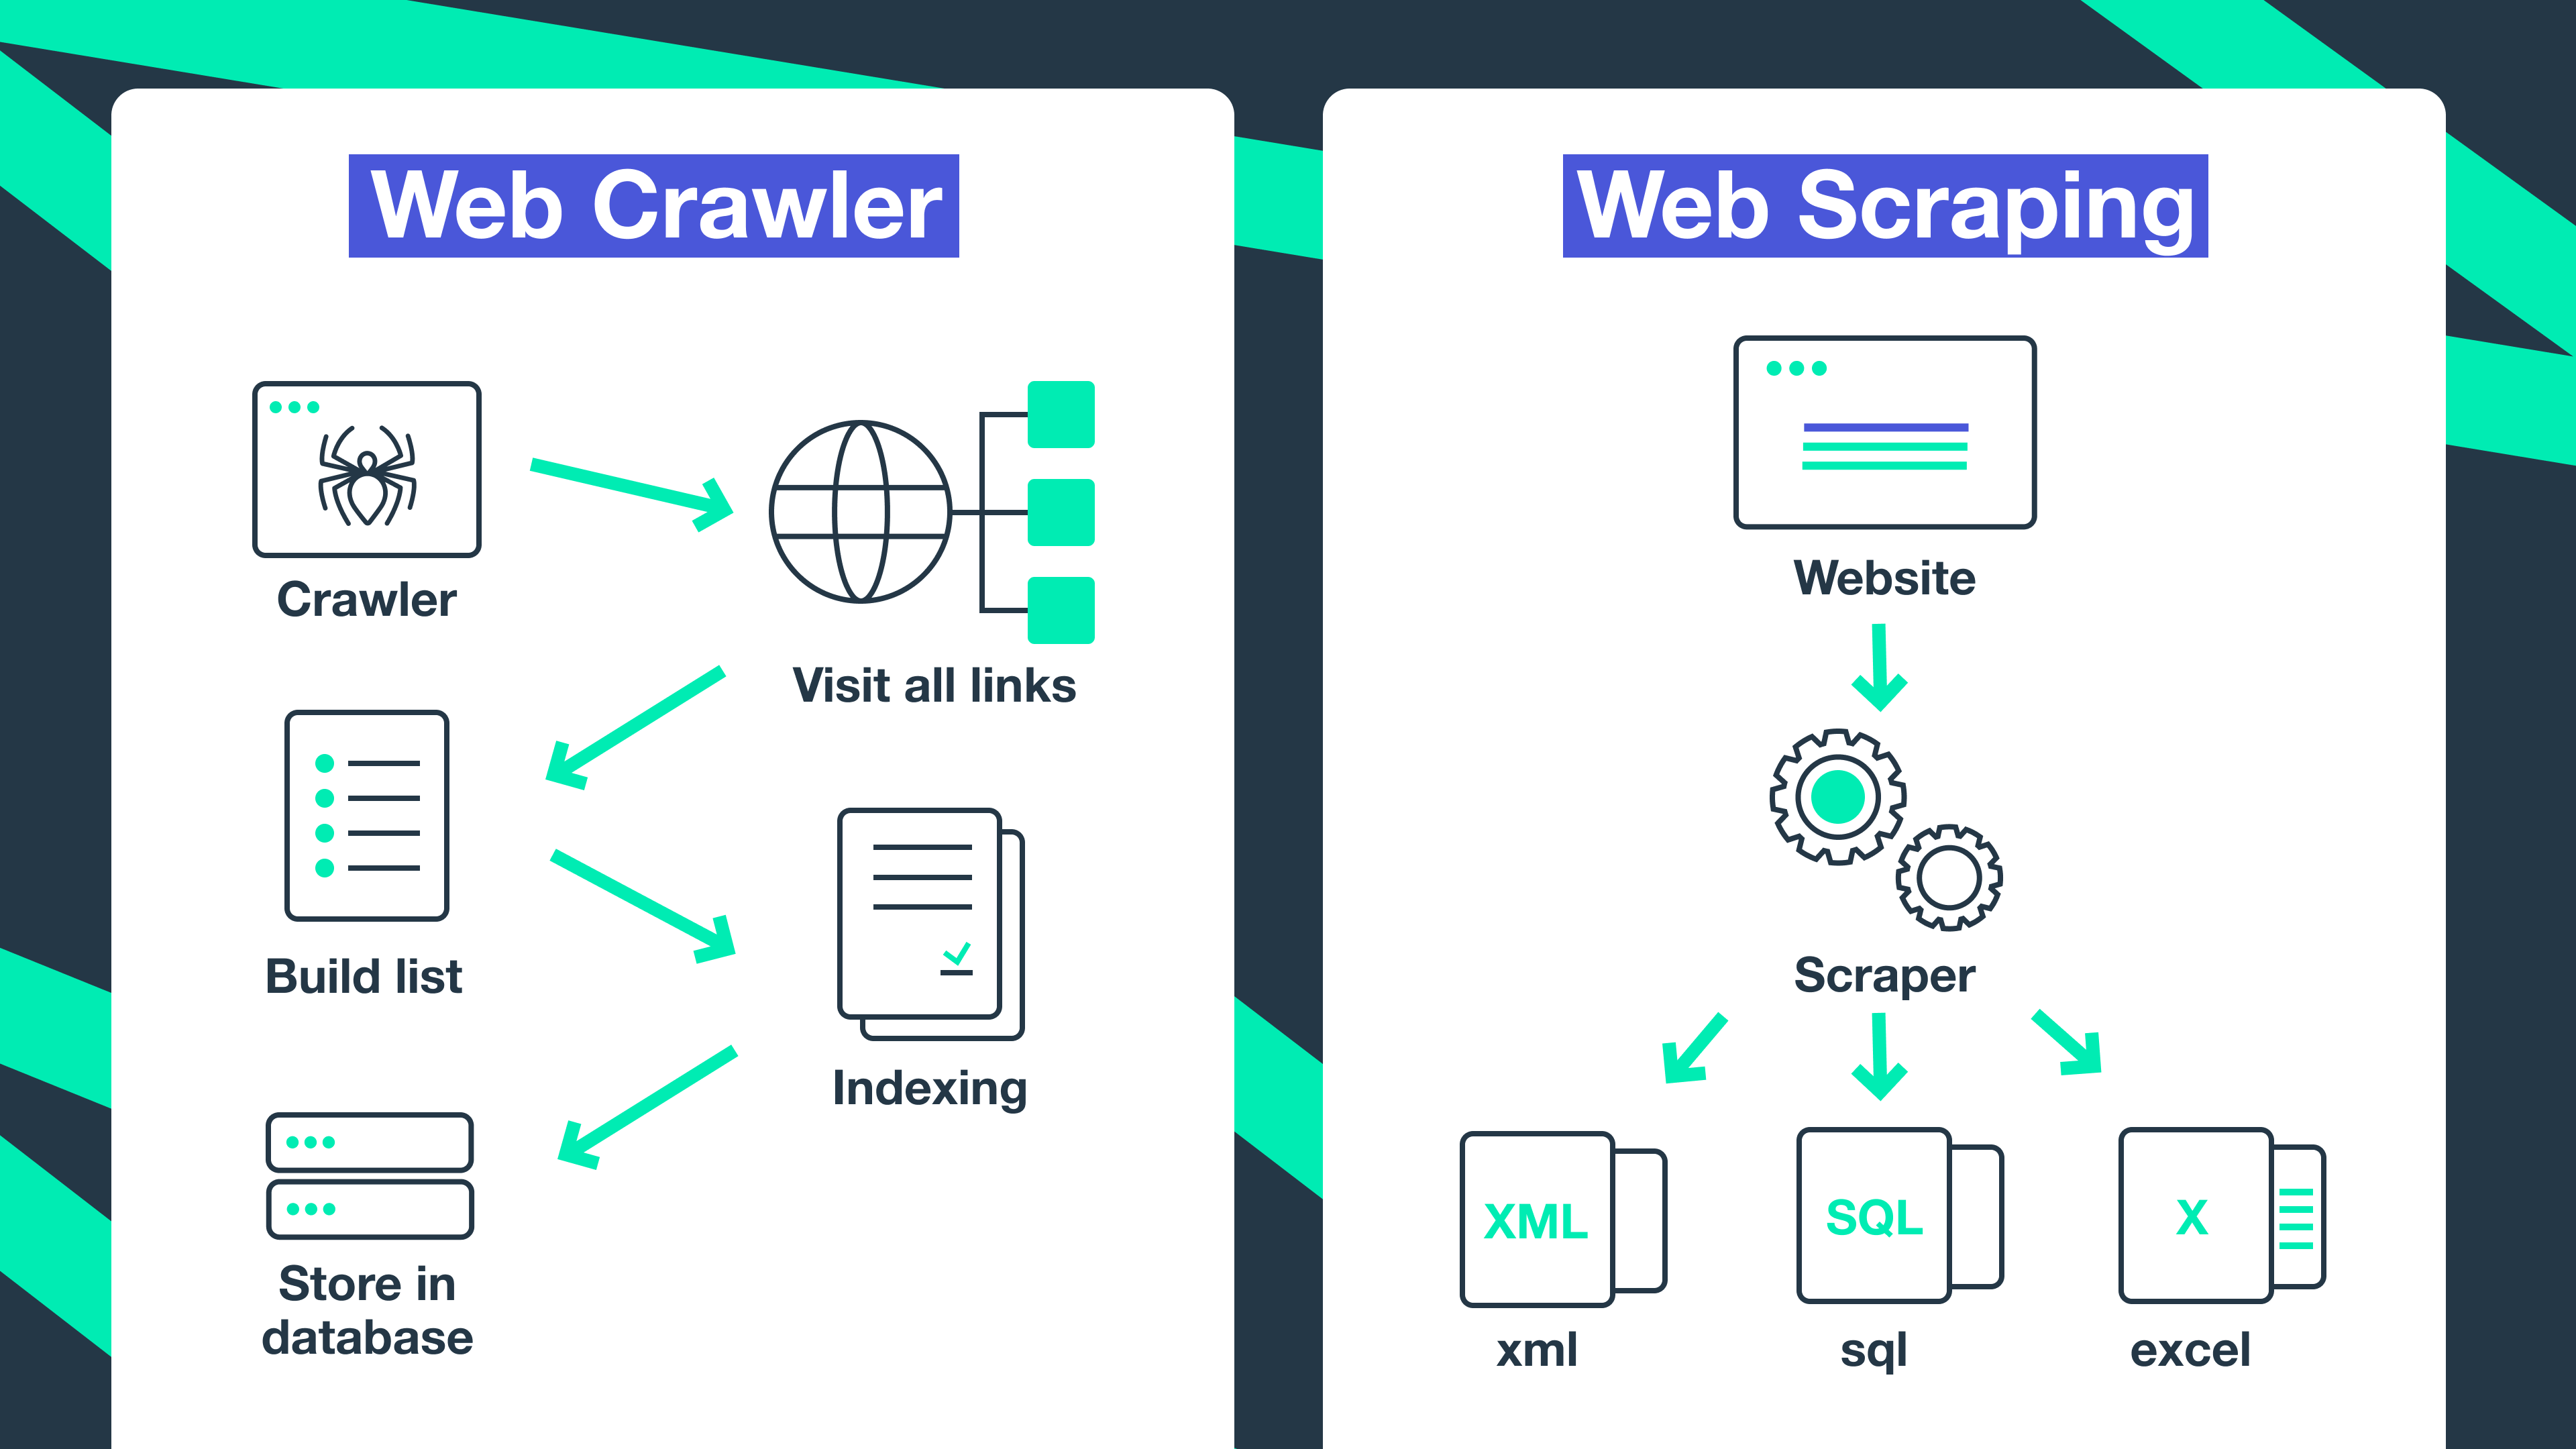 The differences between web crawling and web scraping.